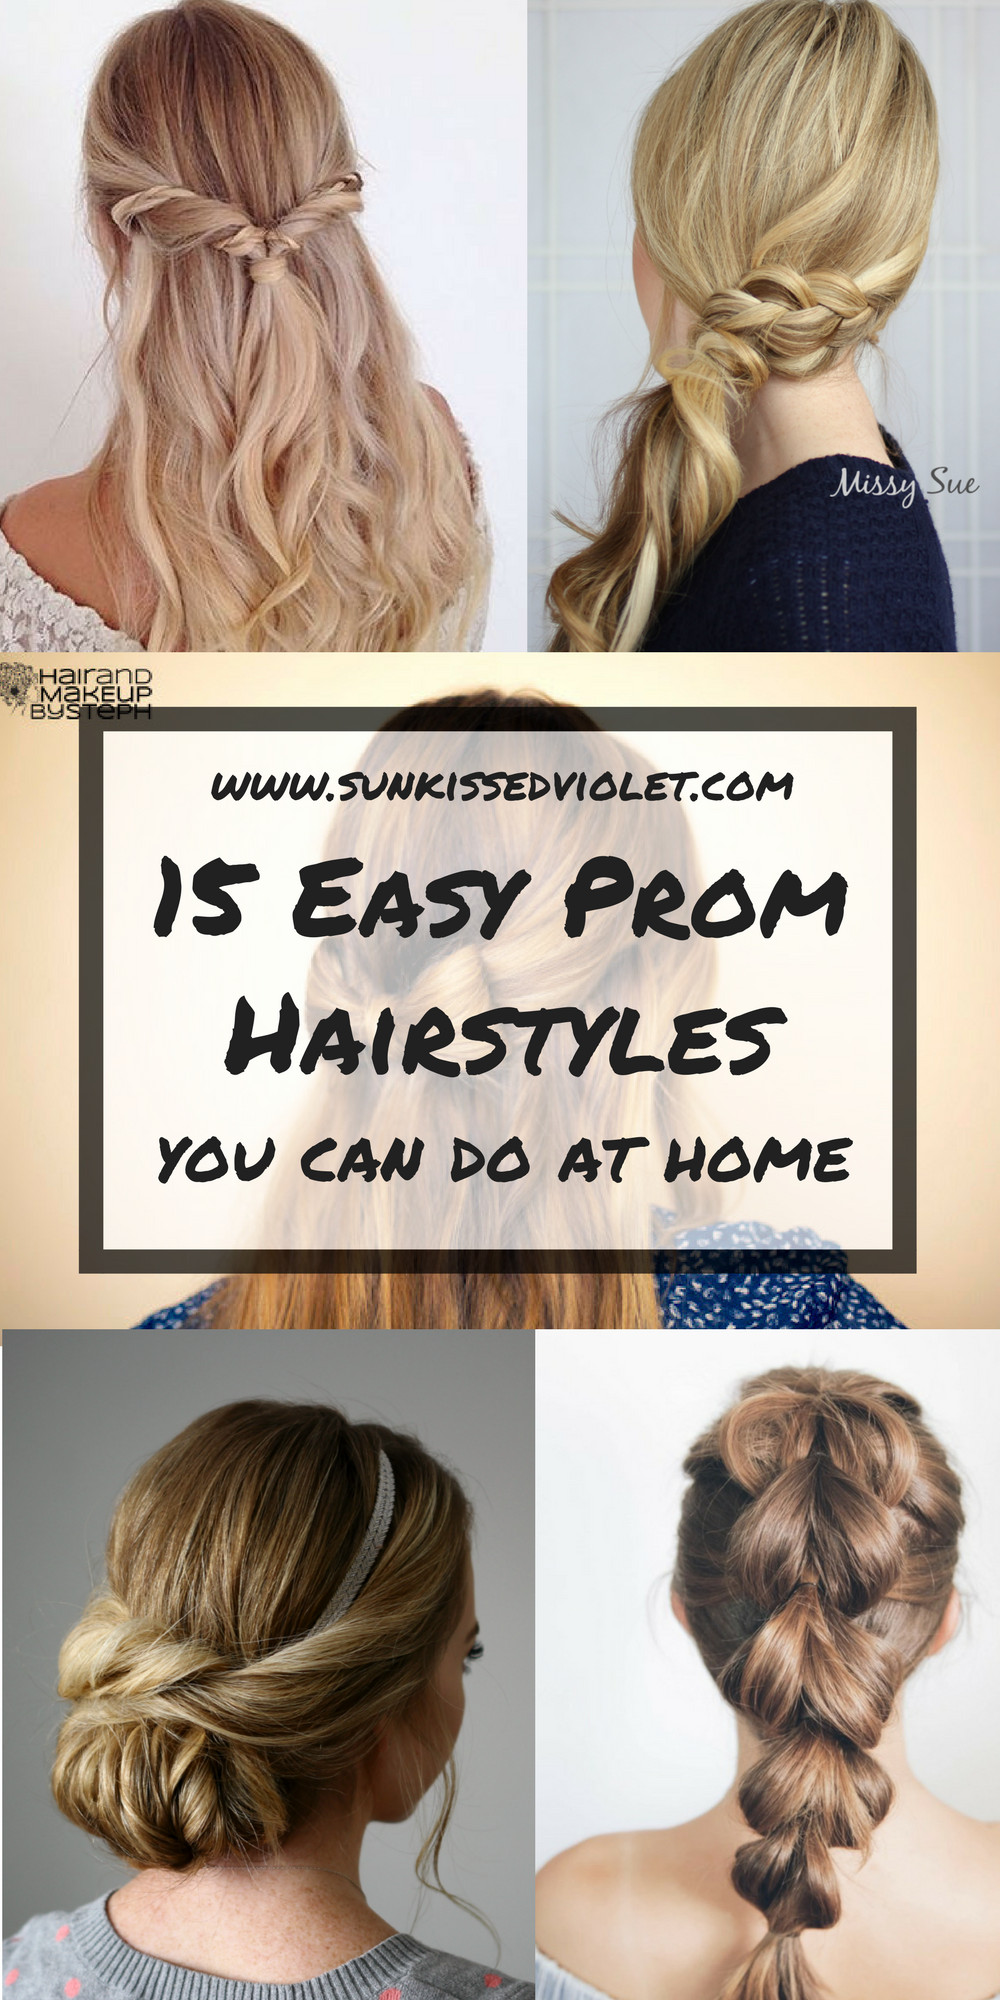 Easy DIY Updos For Long Hair
 Great Ideas 23 Updo Hairstyles You Can Do At Home